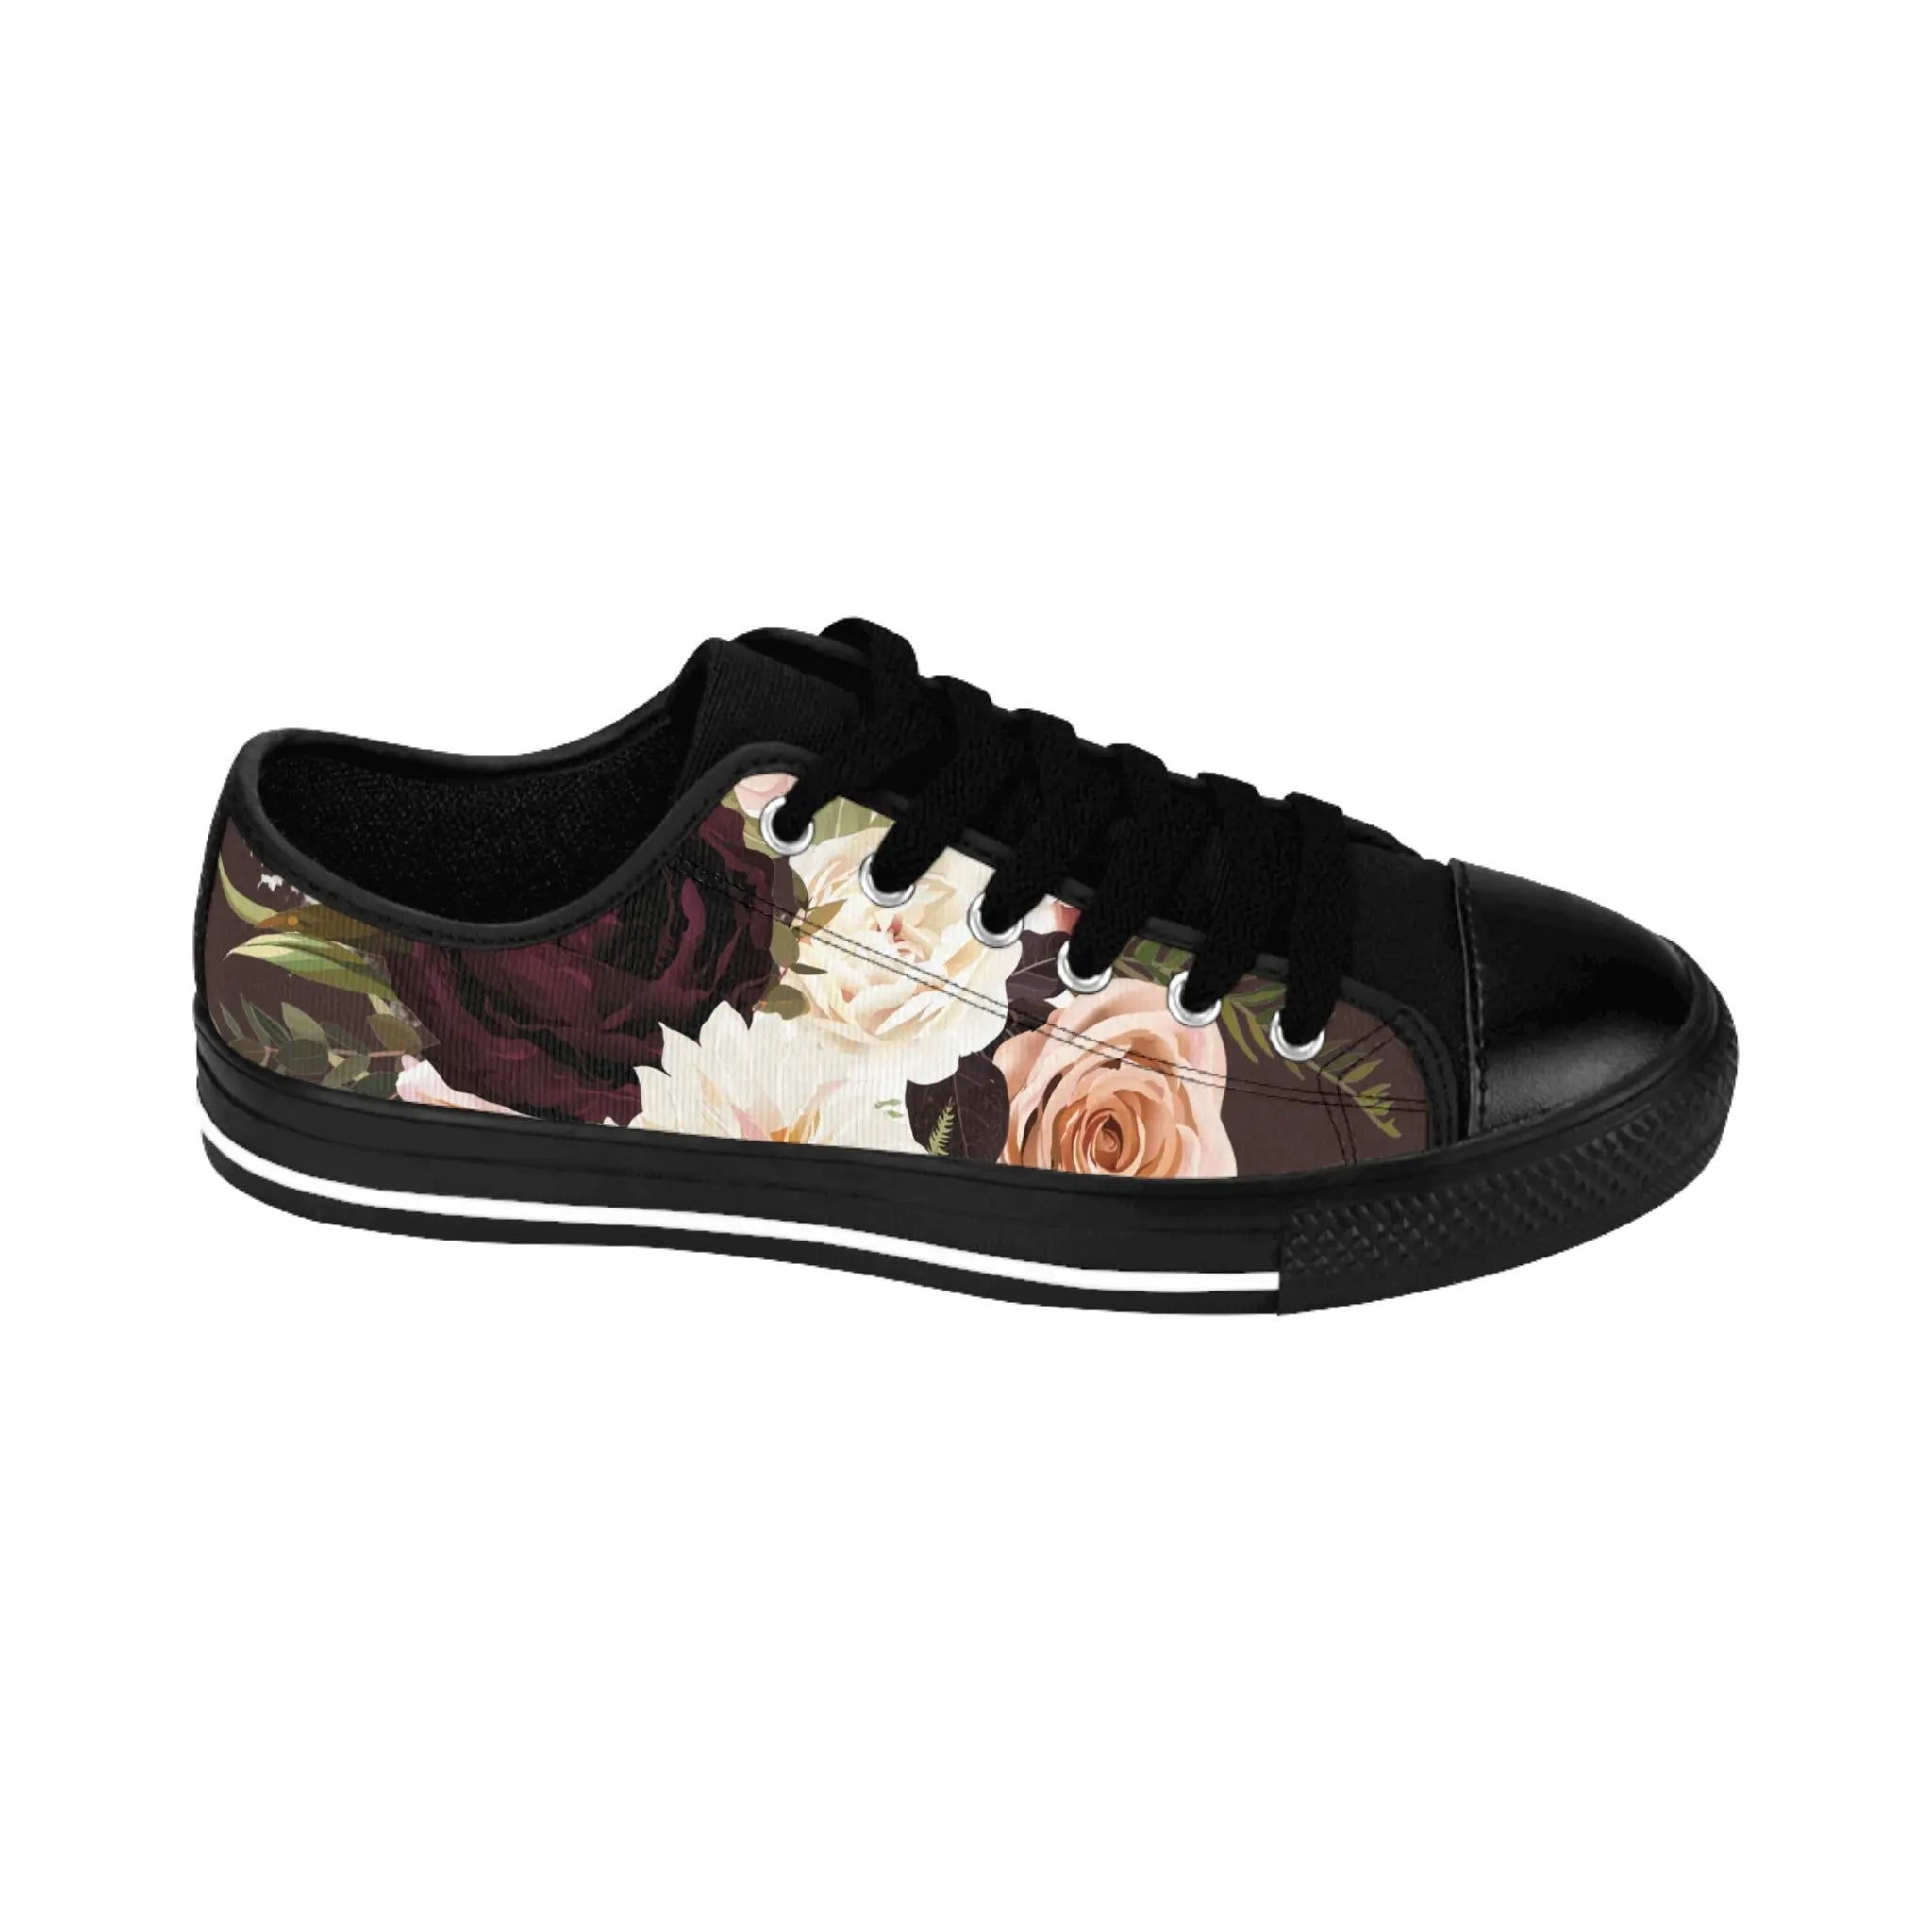  BOHO STAY WILD (Dark Bloom) Chocolate Brown Women's Low Top Canvas Shoes ShoesUS12Blacksole